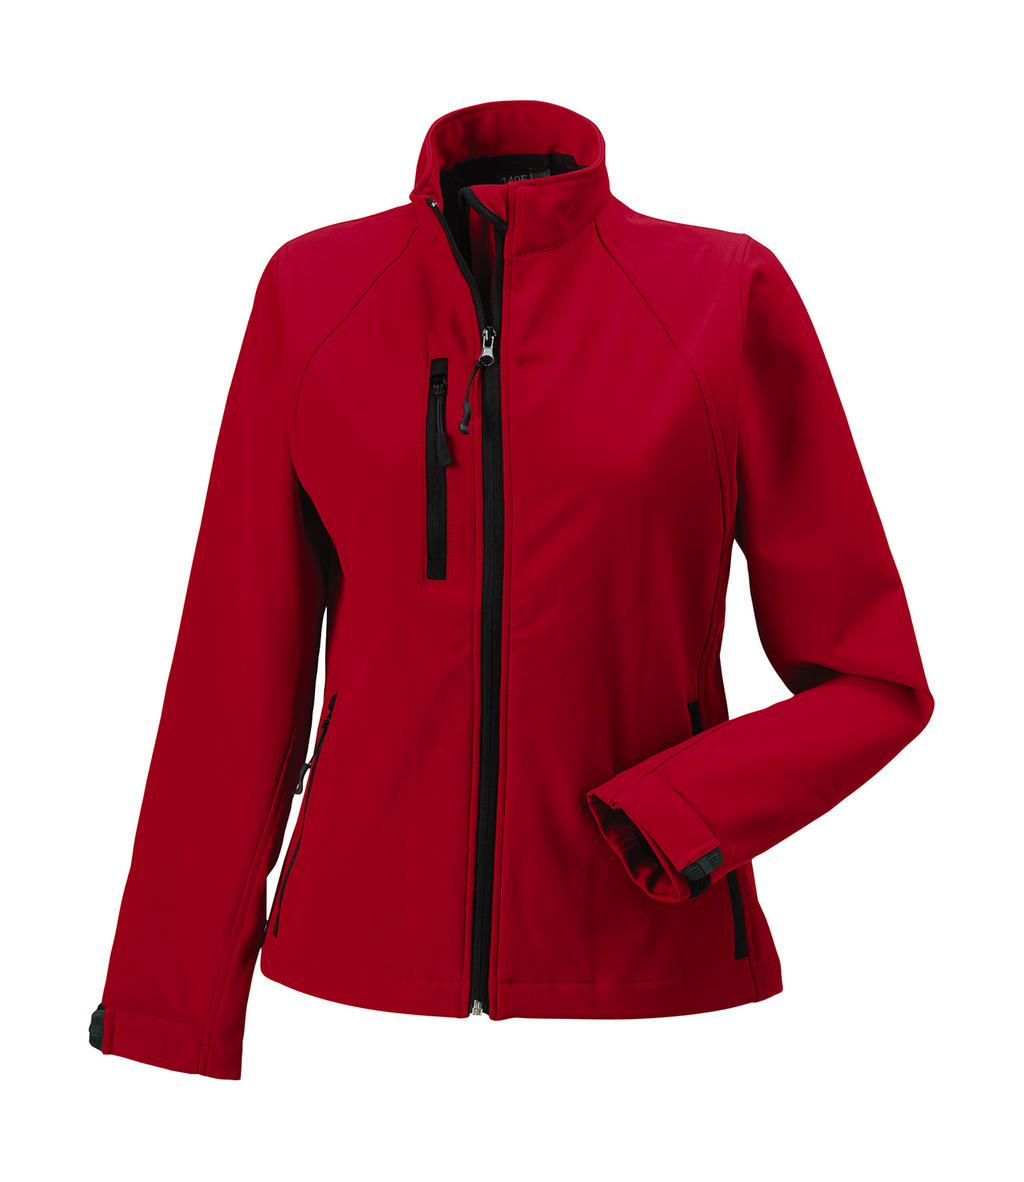  Ladies Softshell Jacket  in Farbe Classic Red